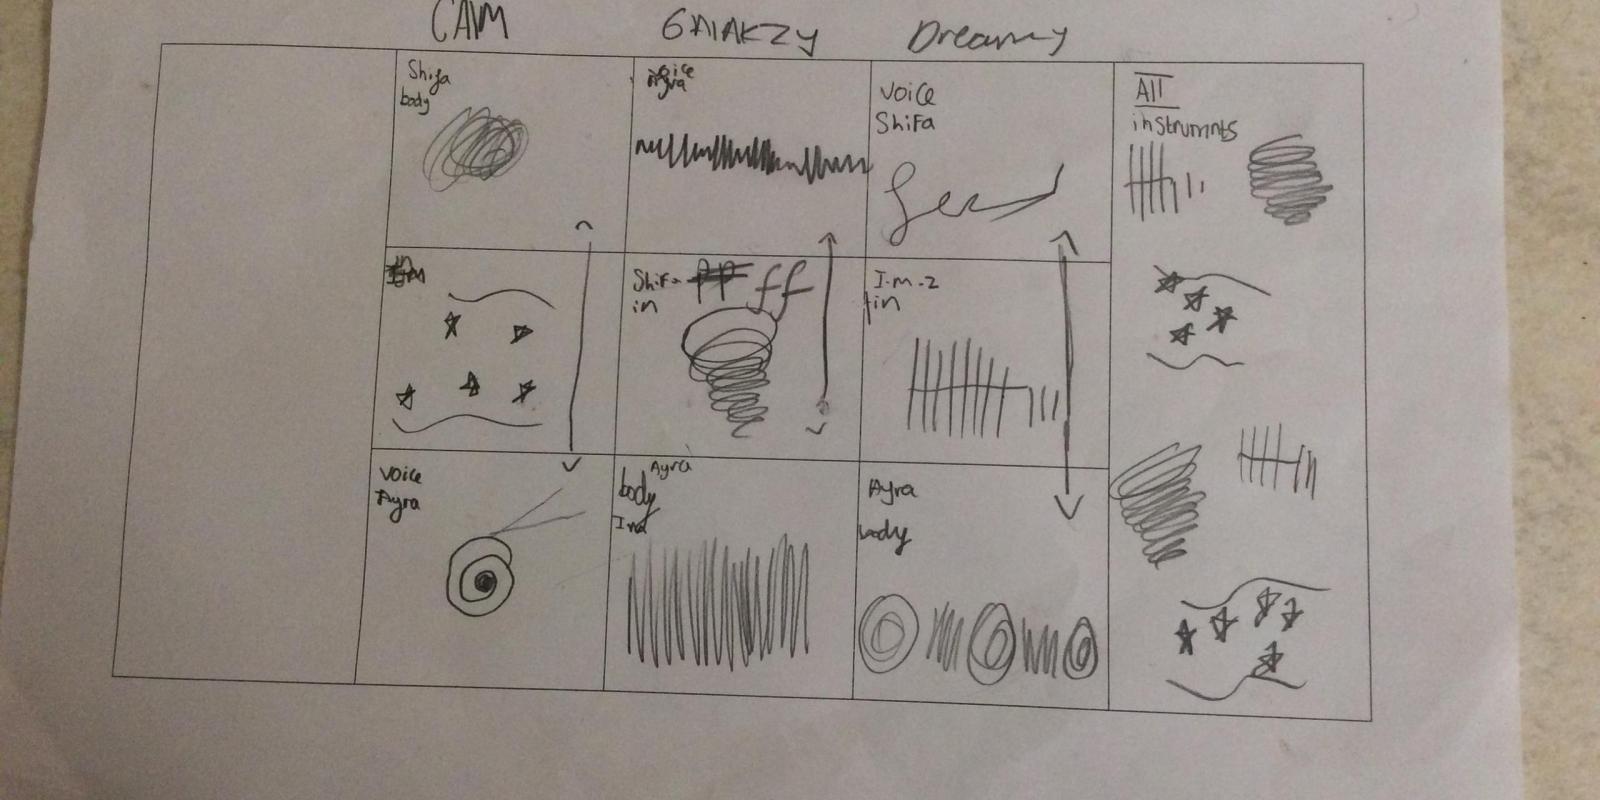 Image of a graphic score drawn by pupils